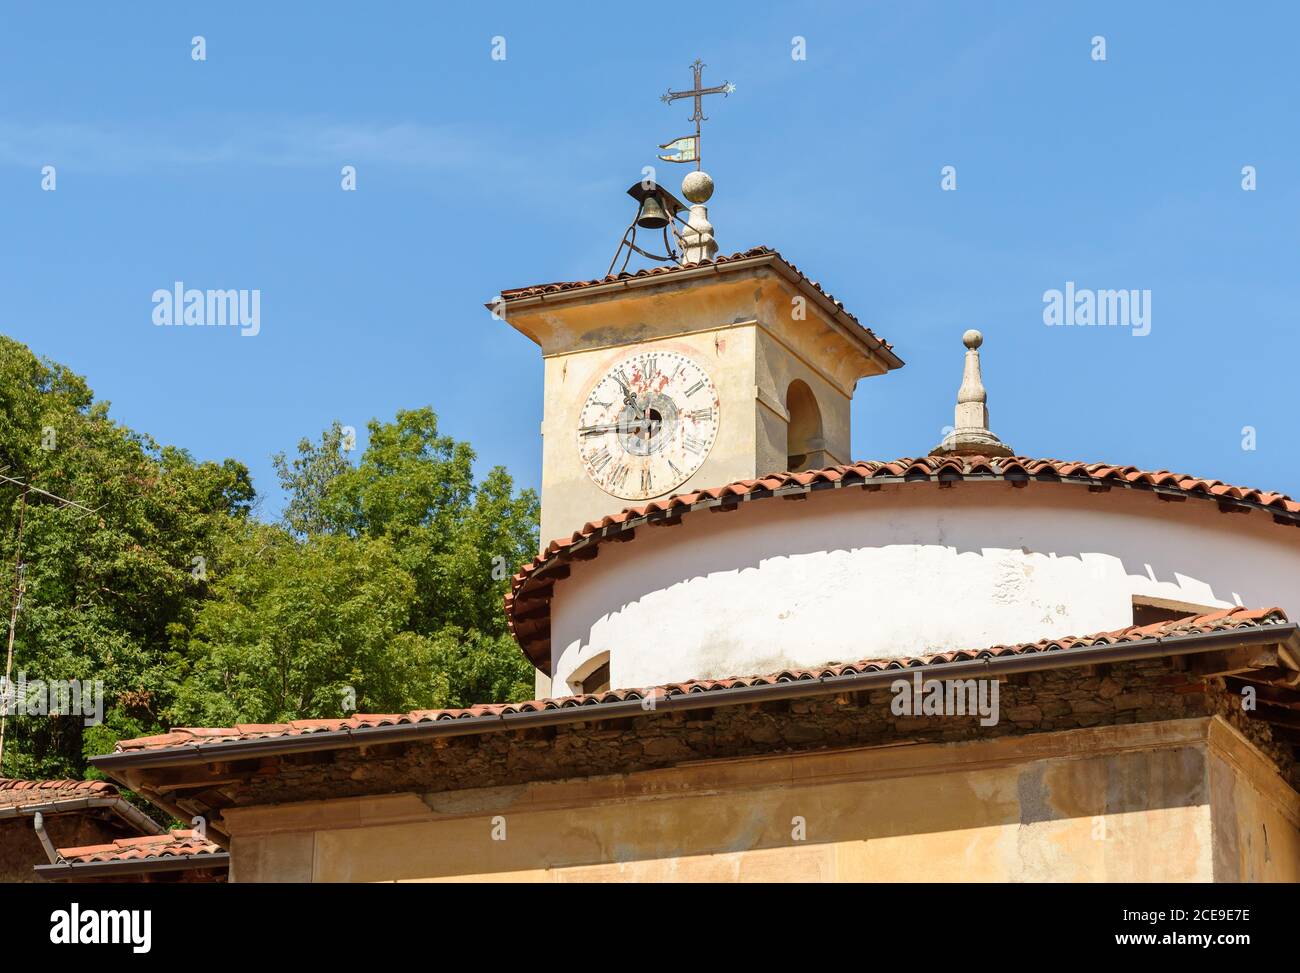 View of the Dome with old clock of the deconsecrated Church of S. Carlo in ancient village Castello Cabiaglio in the province of Varese, Lombardy, Ita Stock Photo